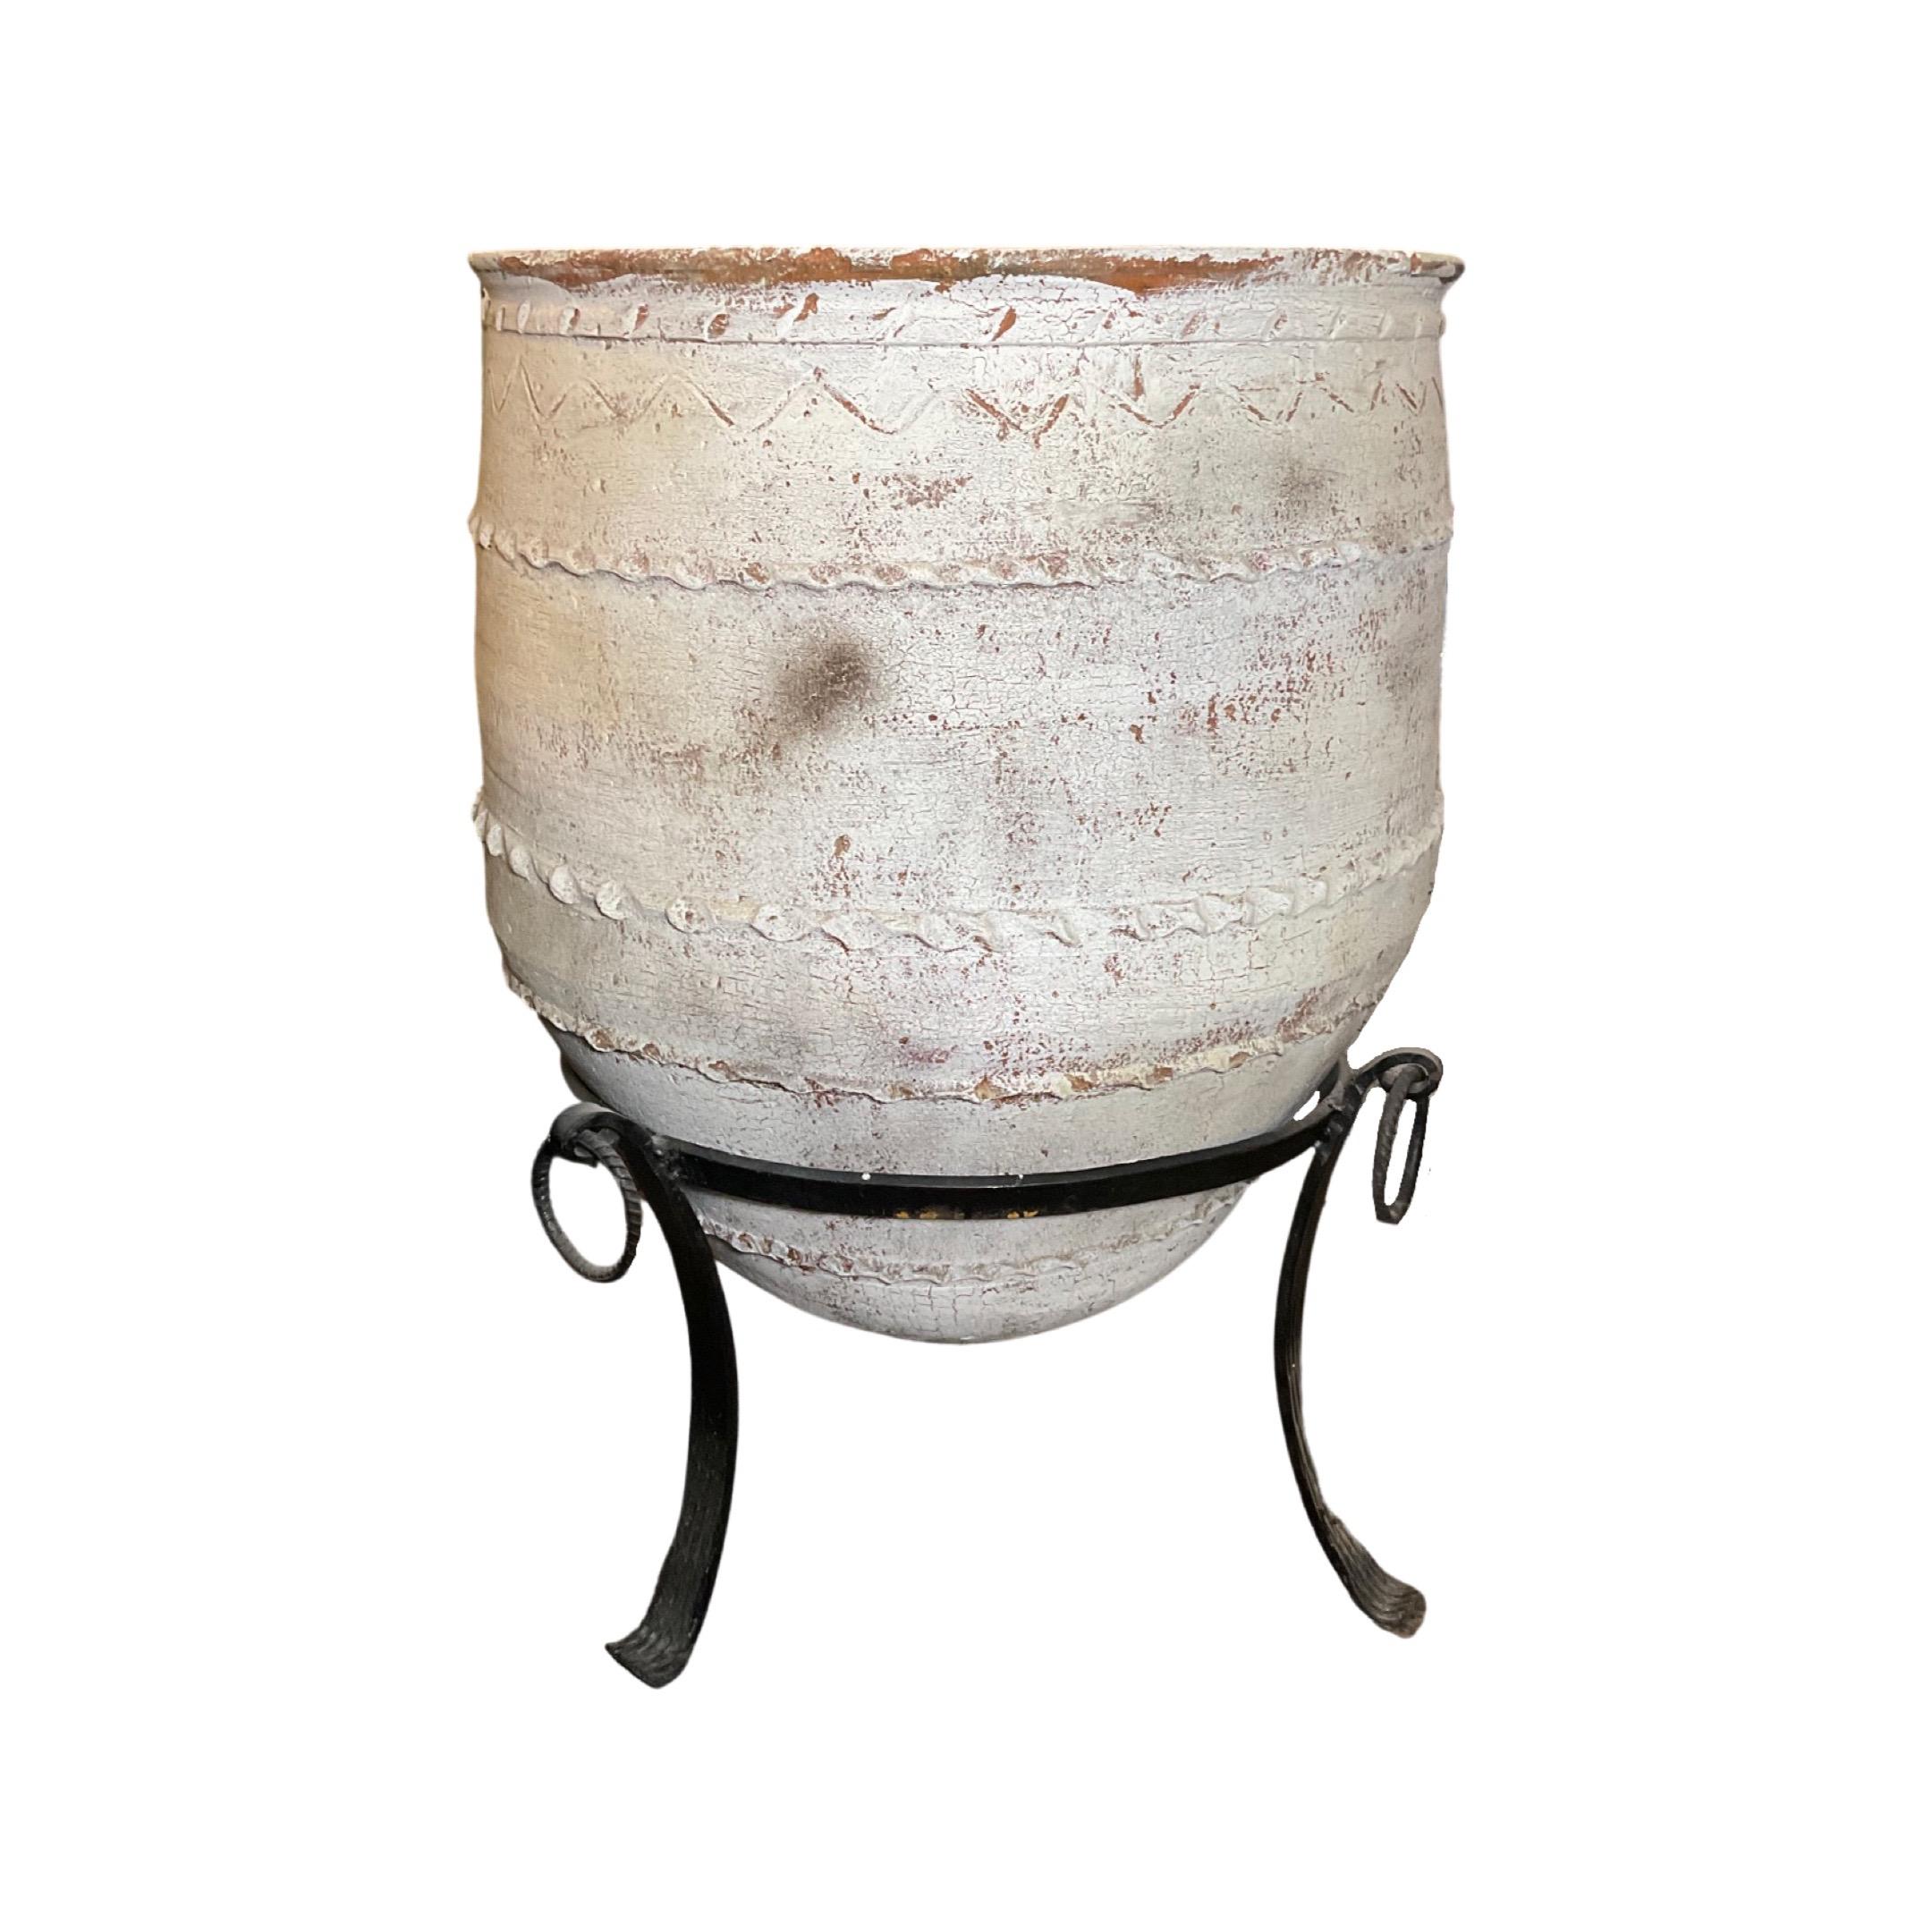 This French Terracotta Planter brings a touch of classic elegance to any outdoor living space. Its white wash finish will not fade in sun or damp weather, while its included tri-stand ensures a secure base, even on uneven ground. Enjoy a timeless